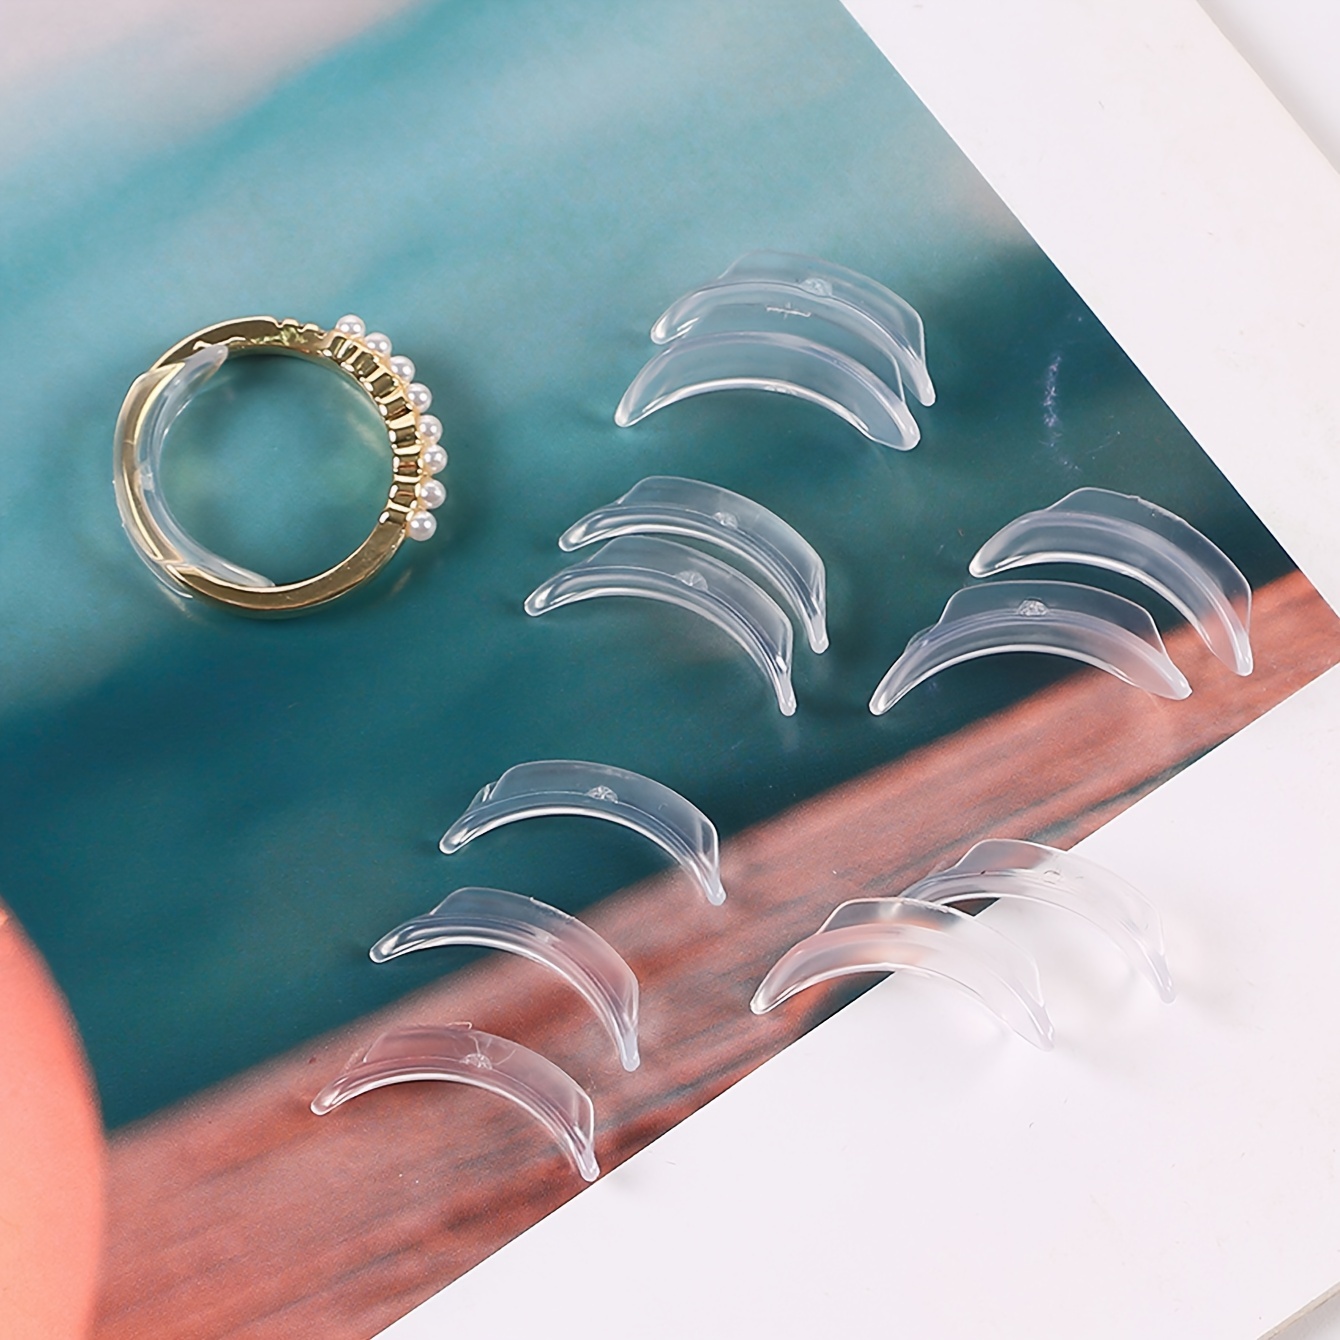 Ring Protector (Now Available!)